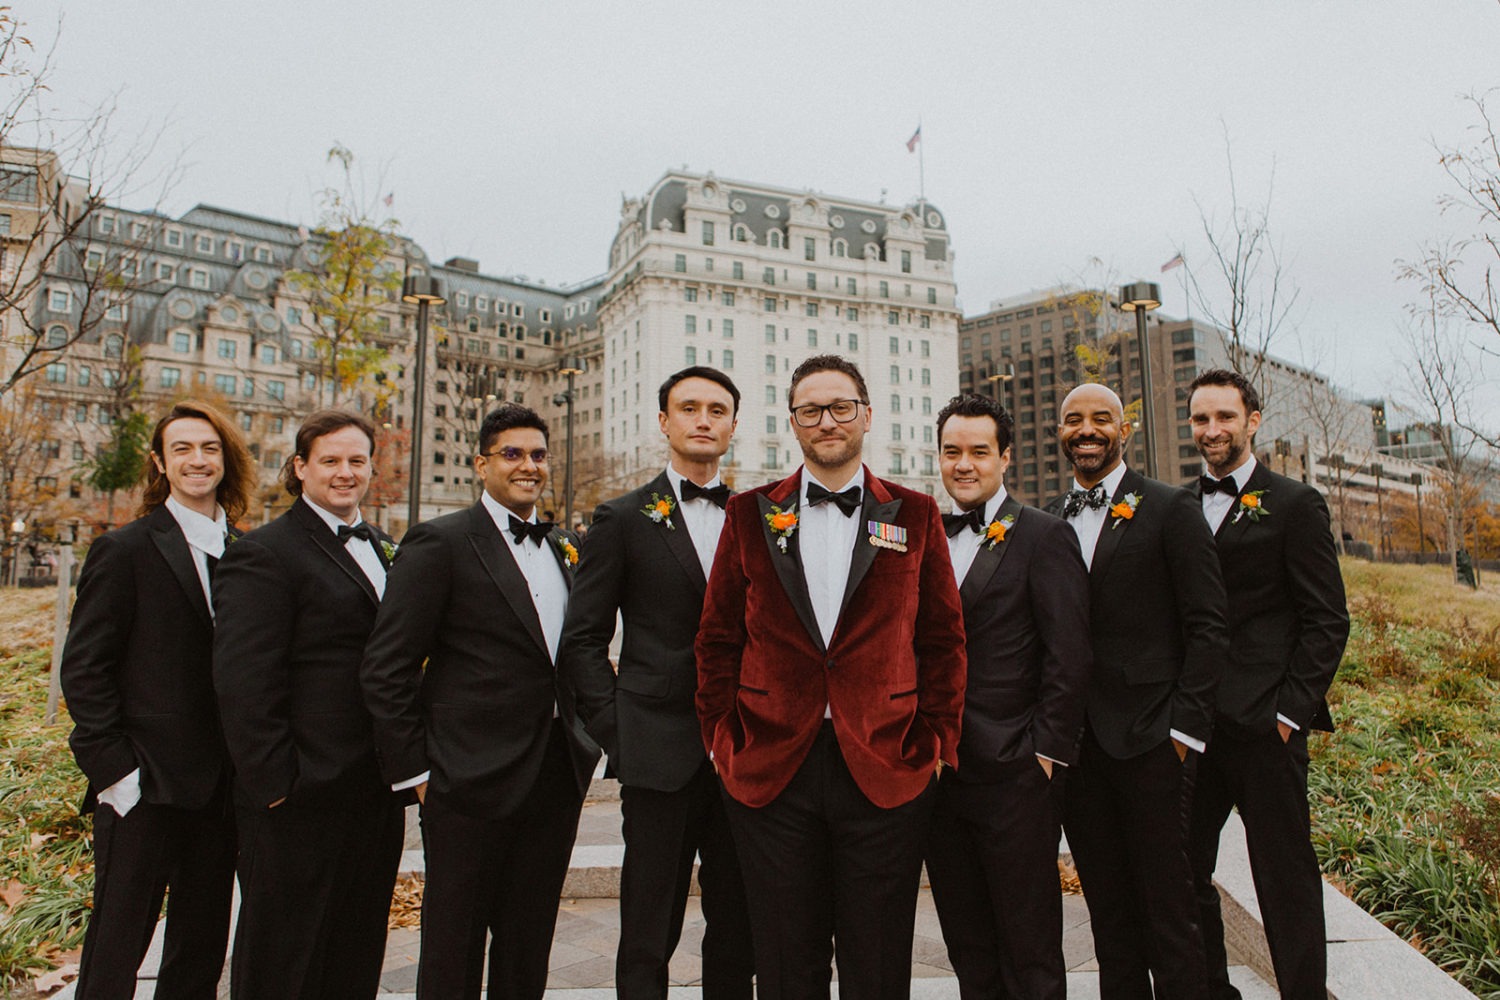 Groomsmen pose together with hands in pockets at Washington DC wedding